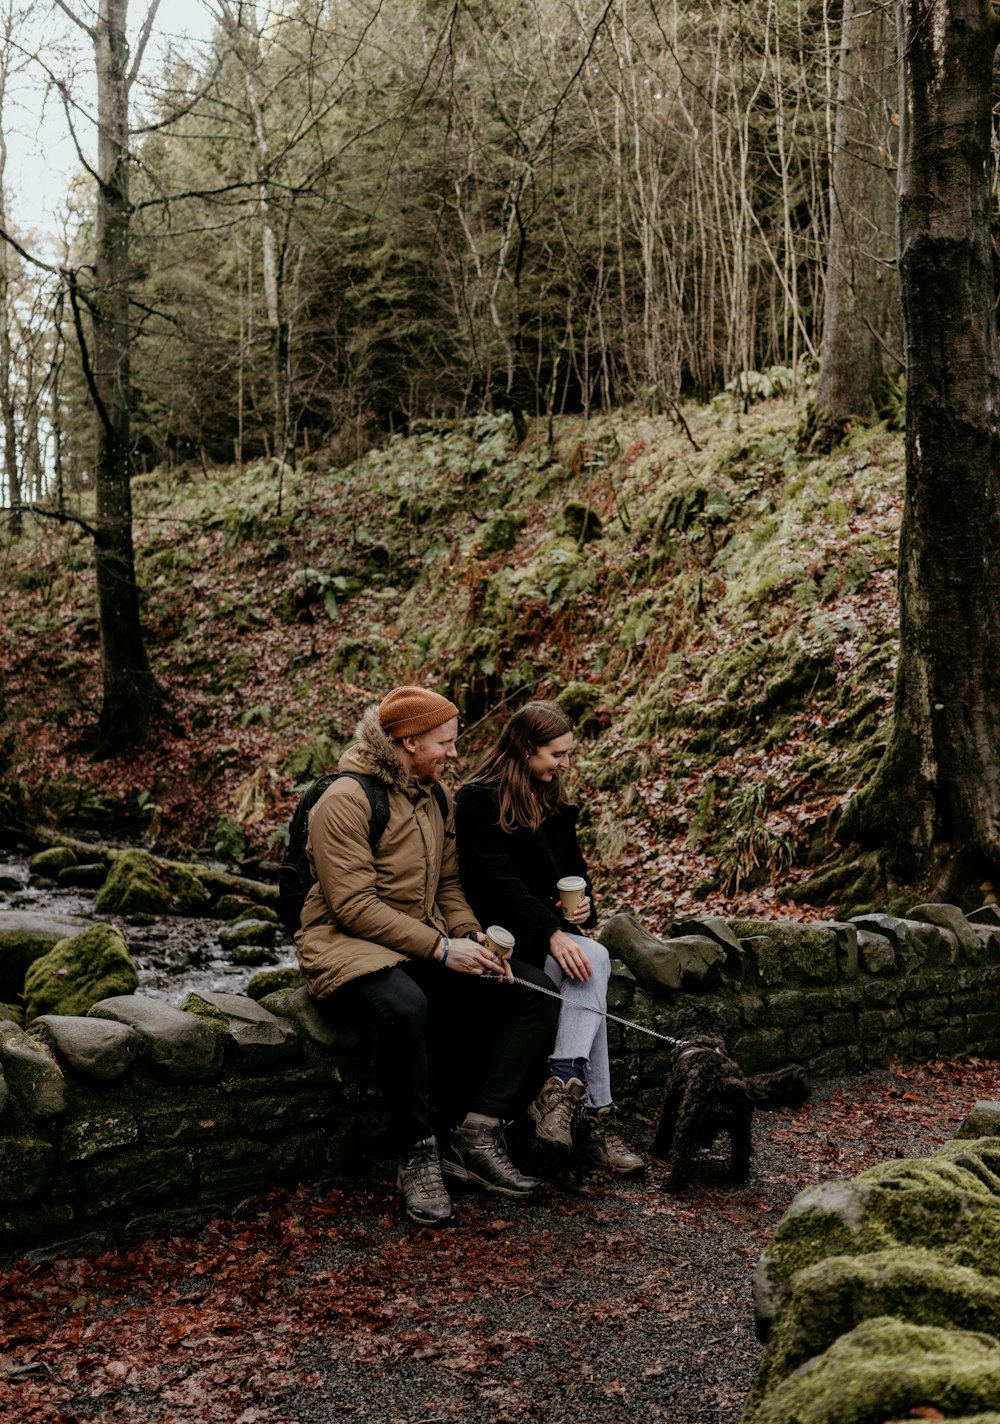 man and woman sitting on rock in the forest during daytime